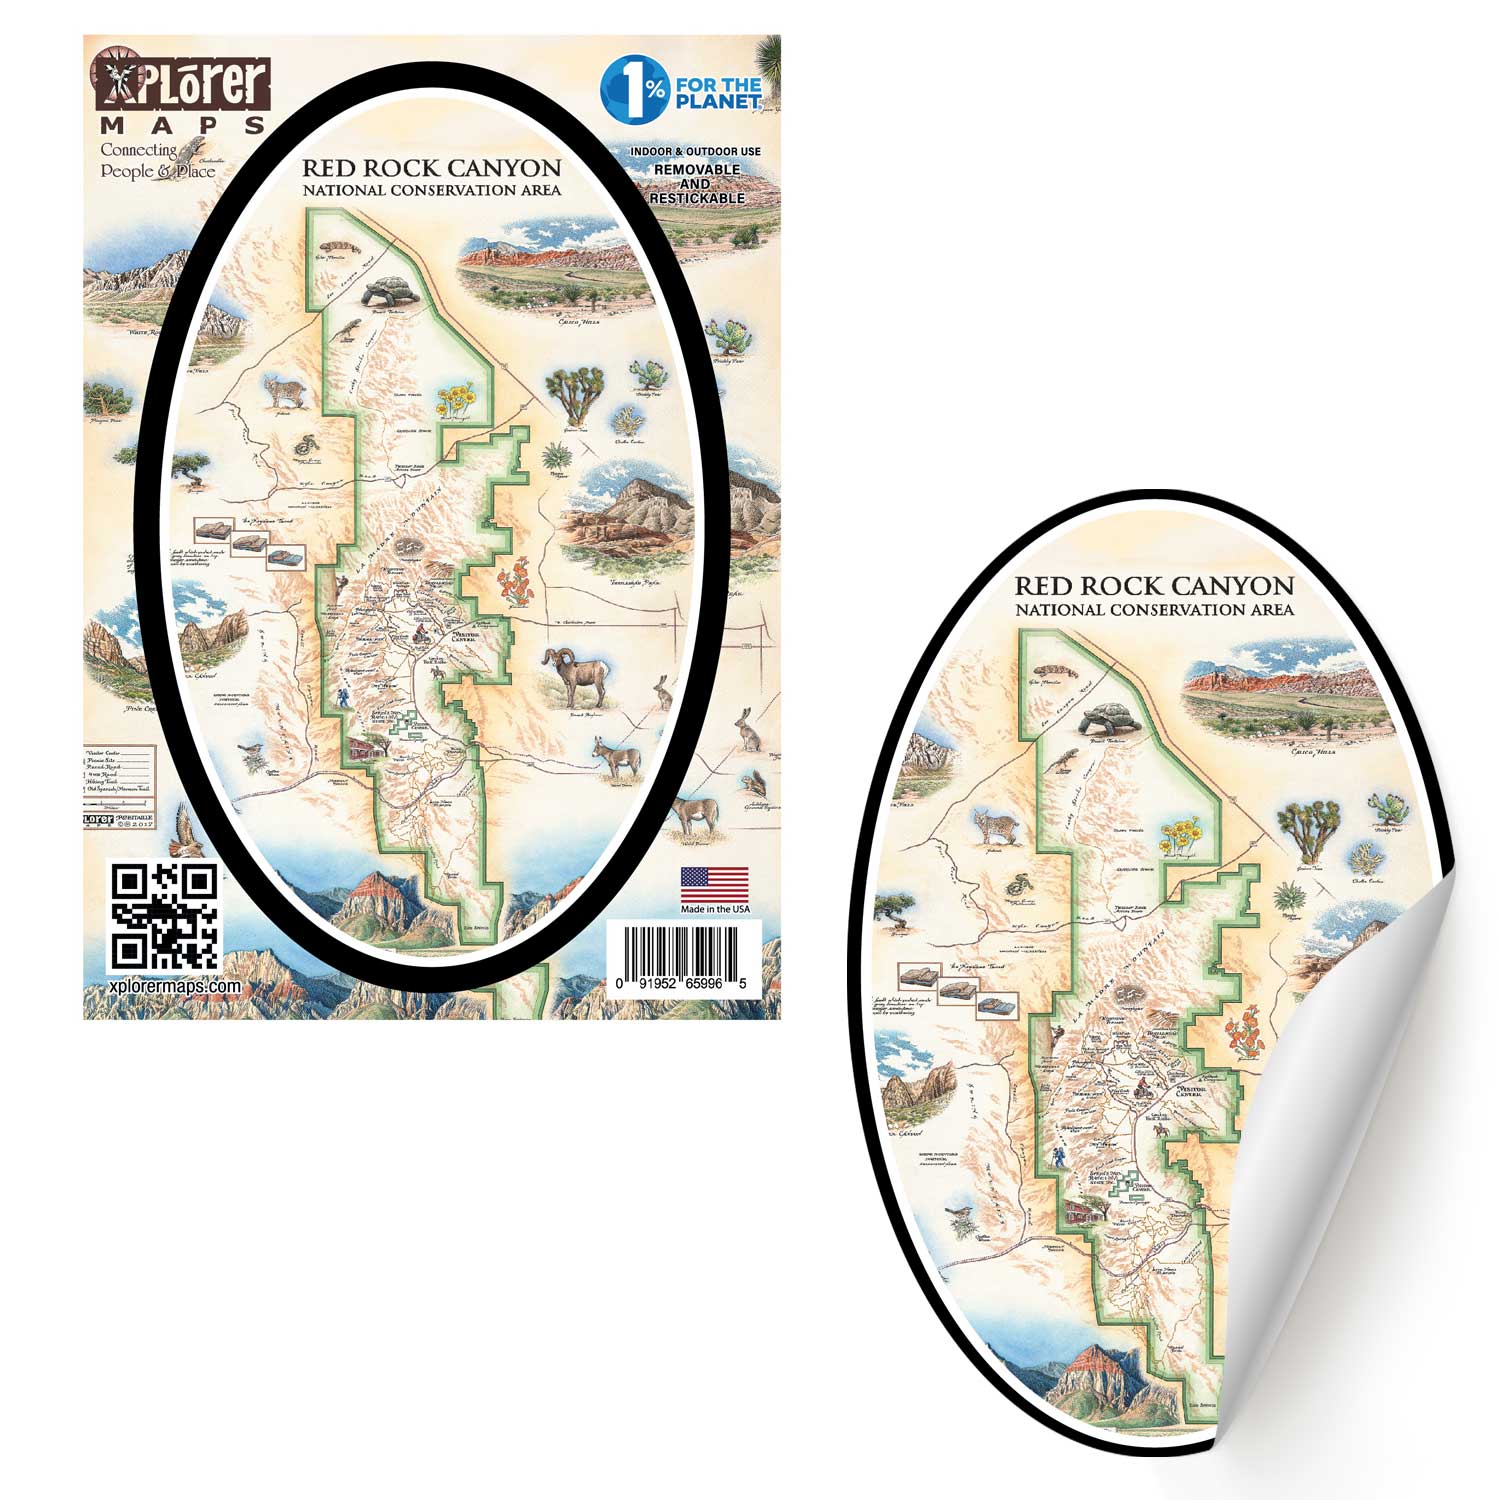 Red Rock Canyon National Conservation Area Map Stickers - Xplorer Maps. The map features illustrations of places such as Mt. Willson, Rainbow Mountain, Bridge Mountain, and Spring Mountain Ranch. Flora and fauna include a red tail hawk, desert Bighorn, Globemallow, Joshua tree, and Prickly pear cactus.